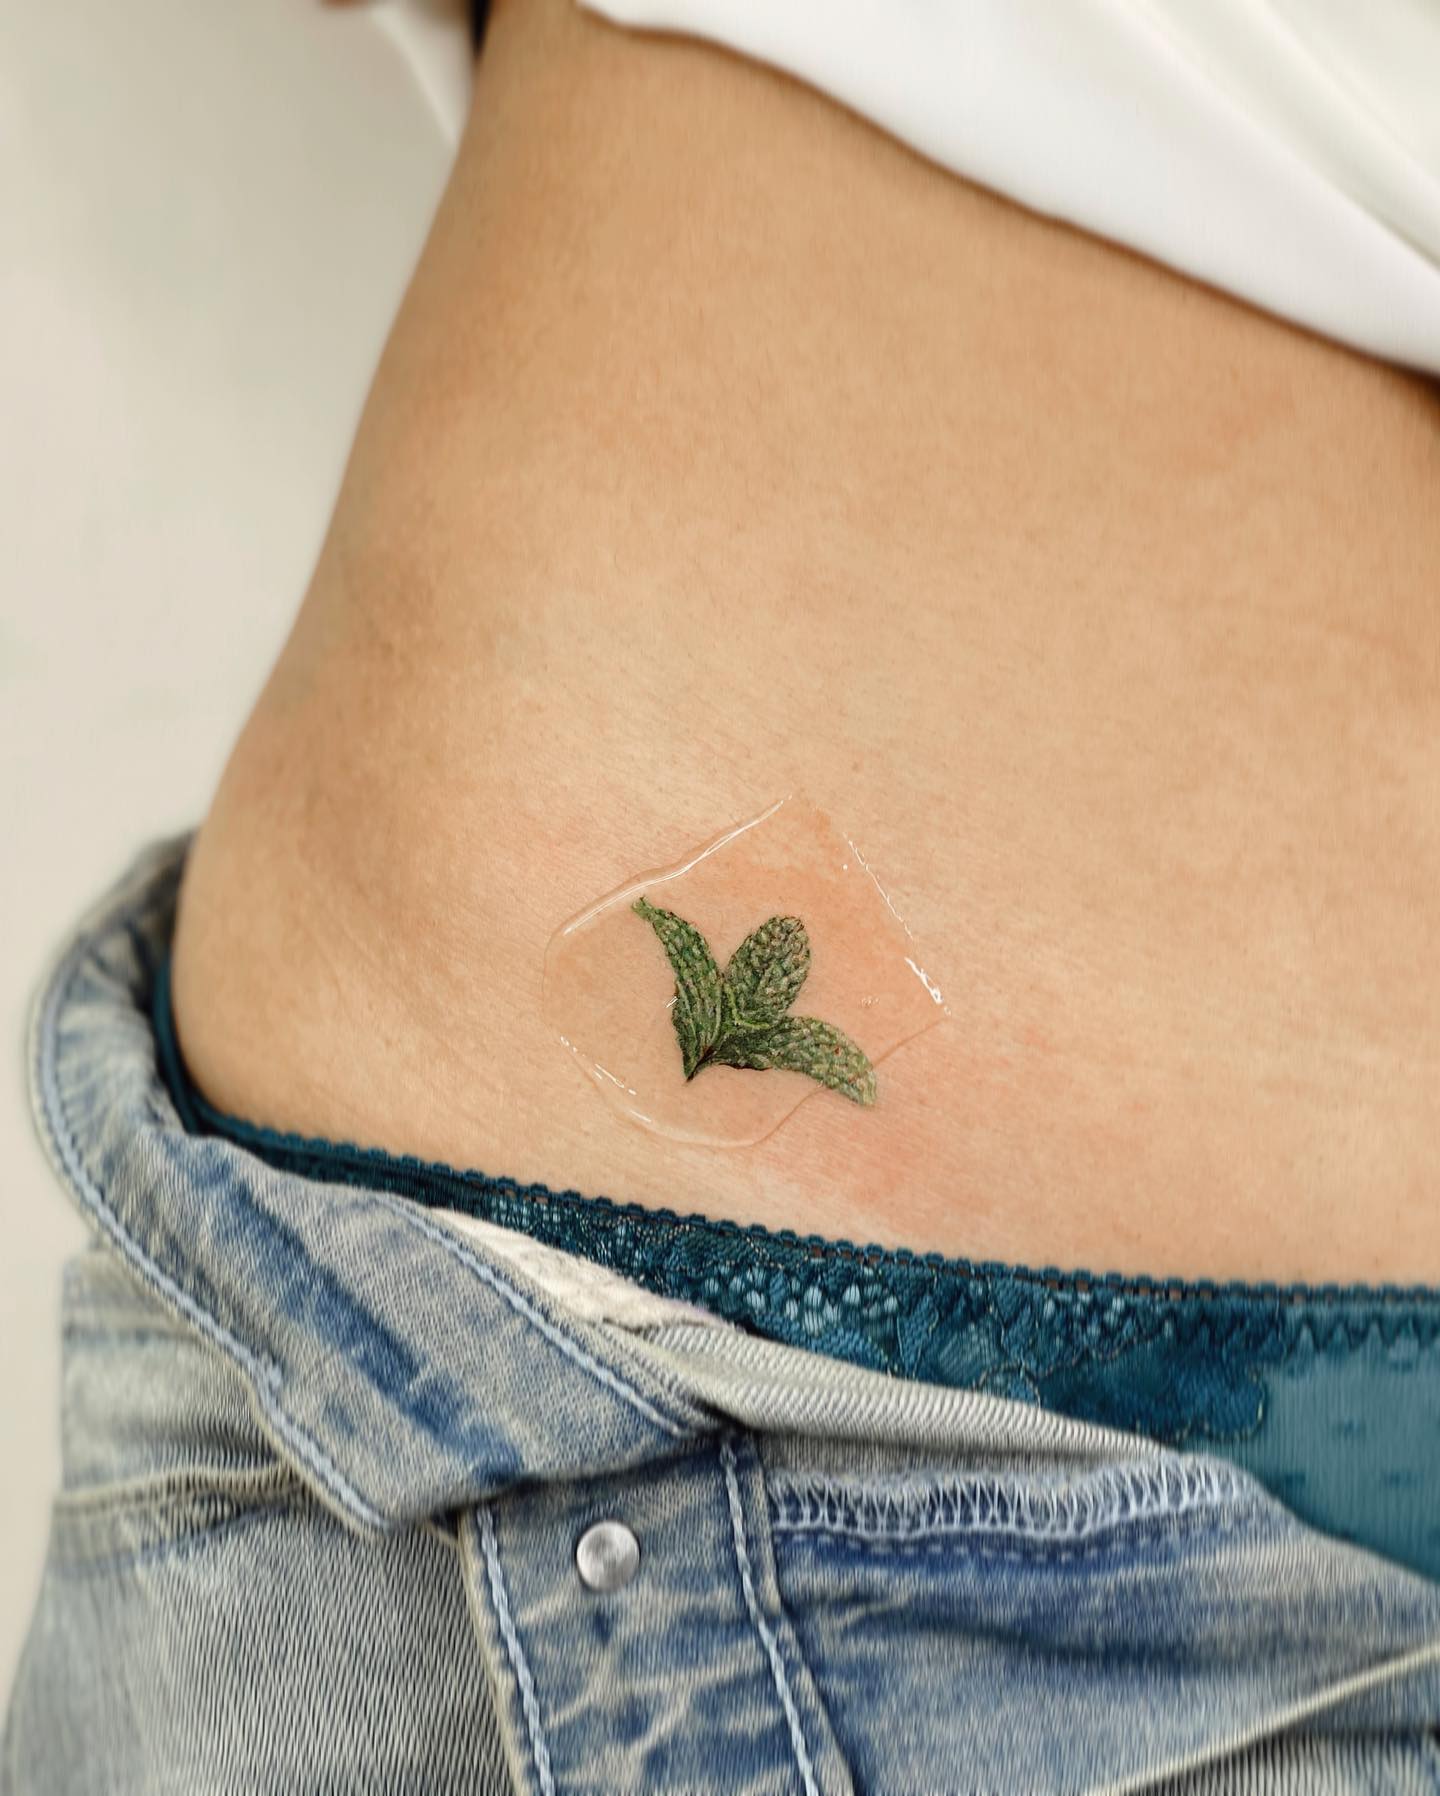 Mint tattoo symbolizes the circle of life and its different stages. Mint leaf is unique the way it looks, so getting a mint leaf tattoo can make you shine out.